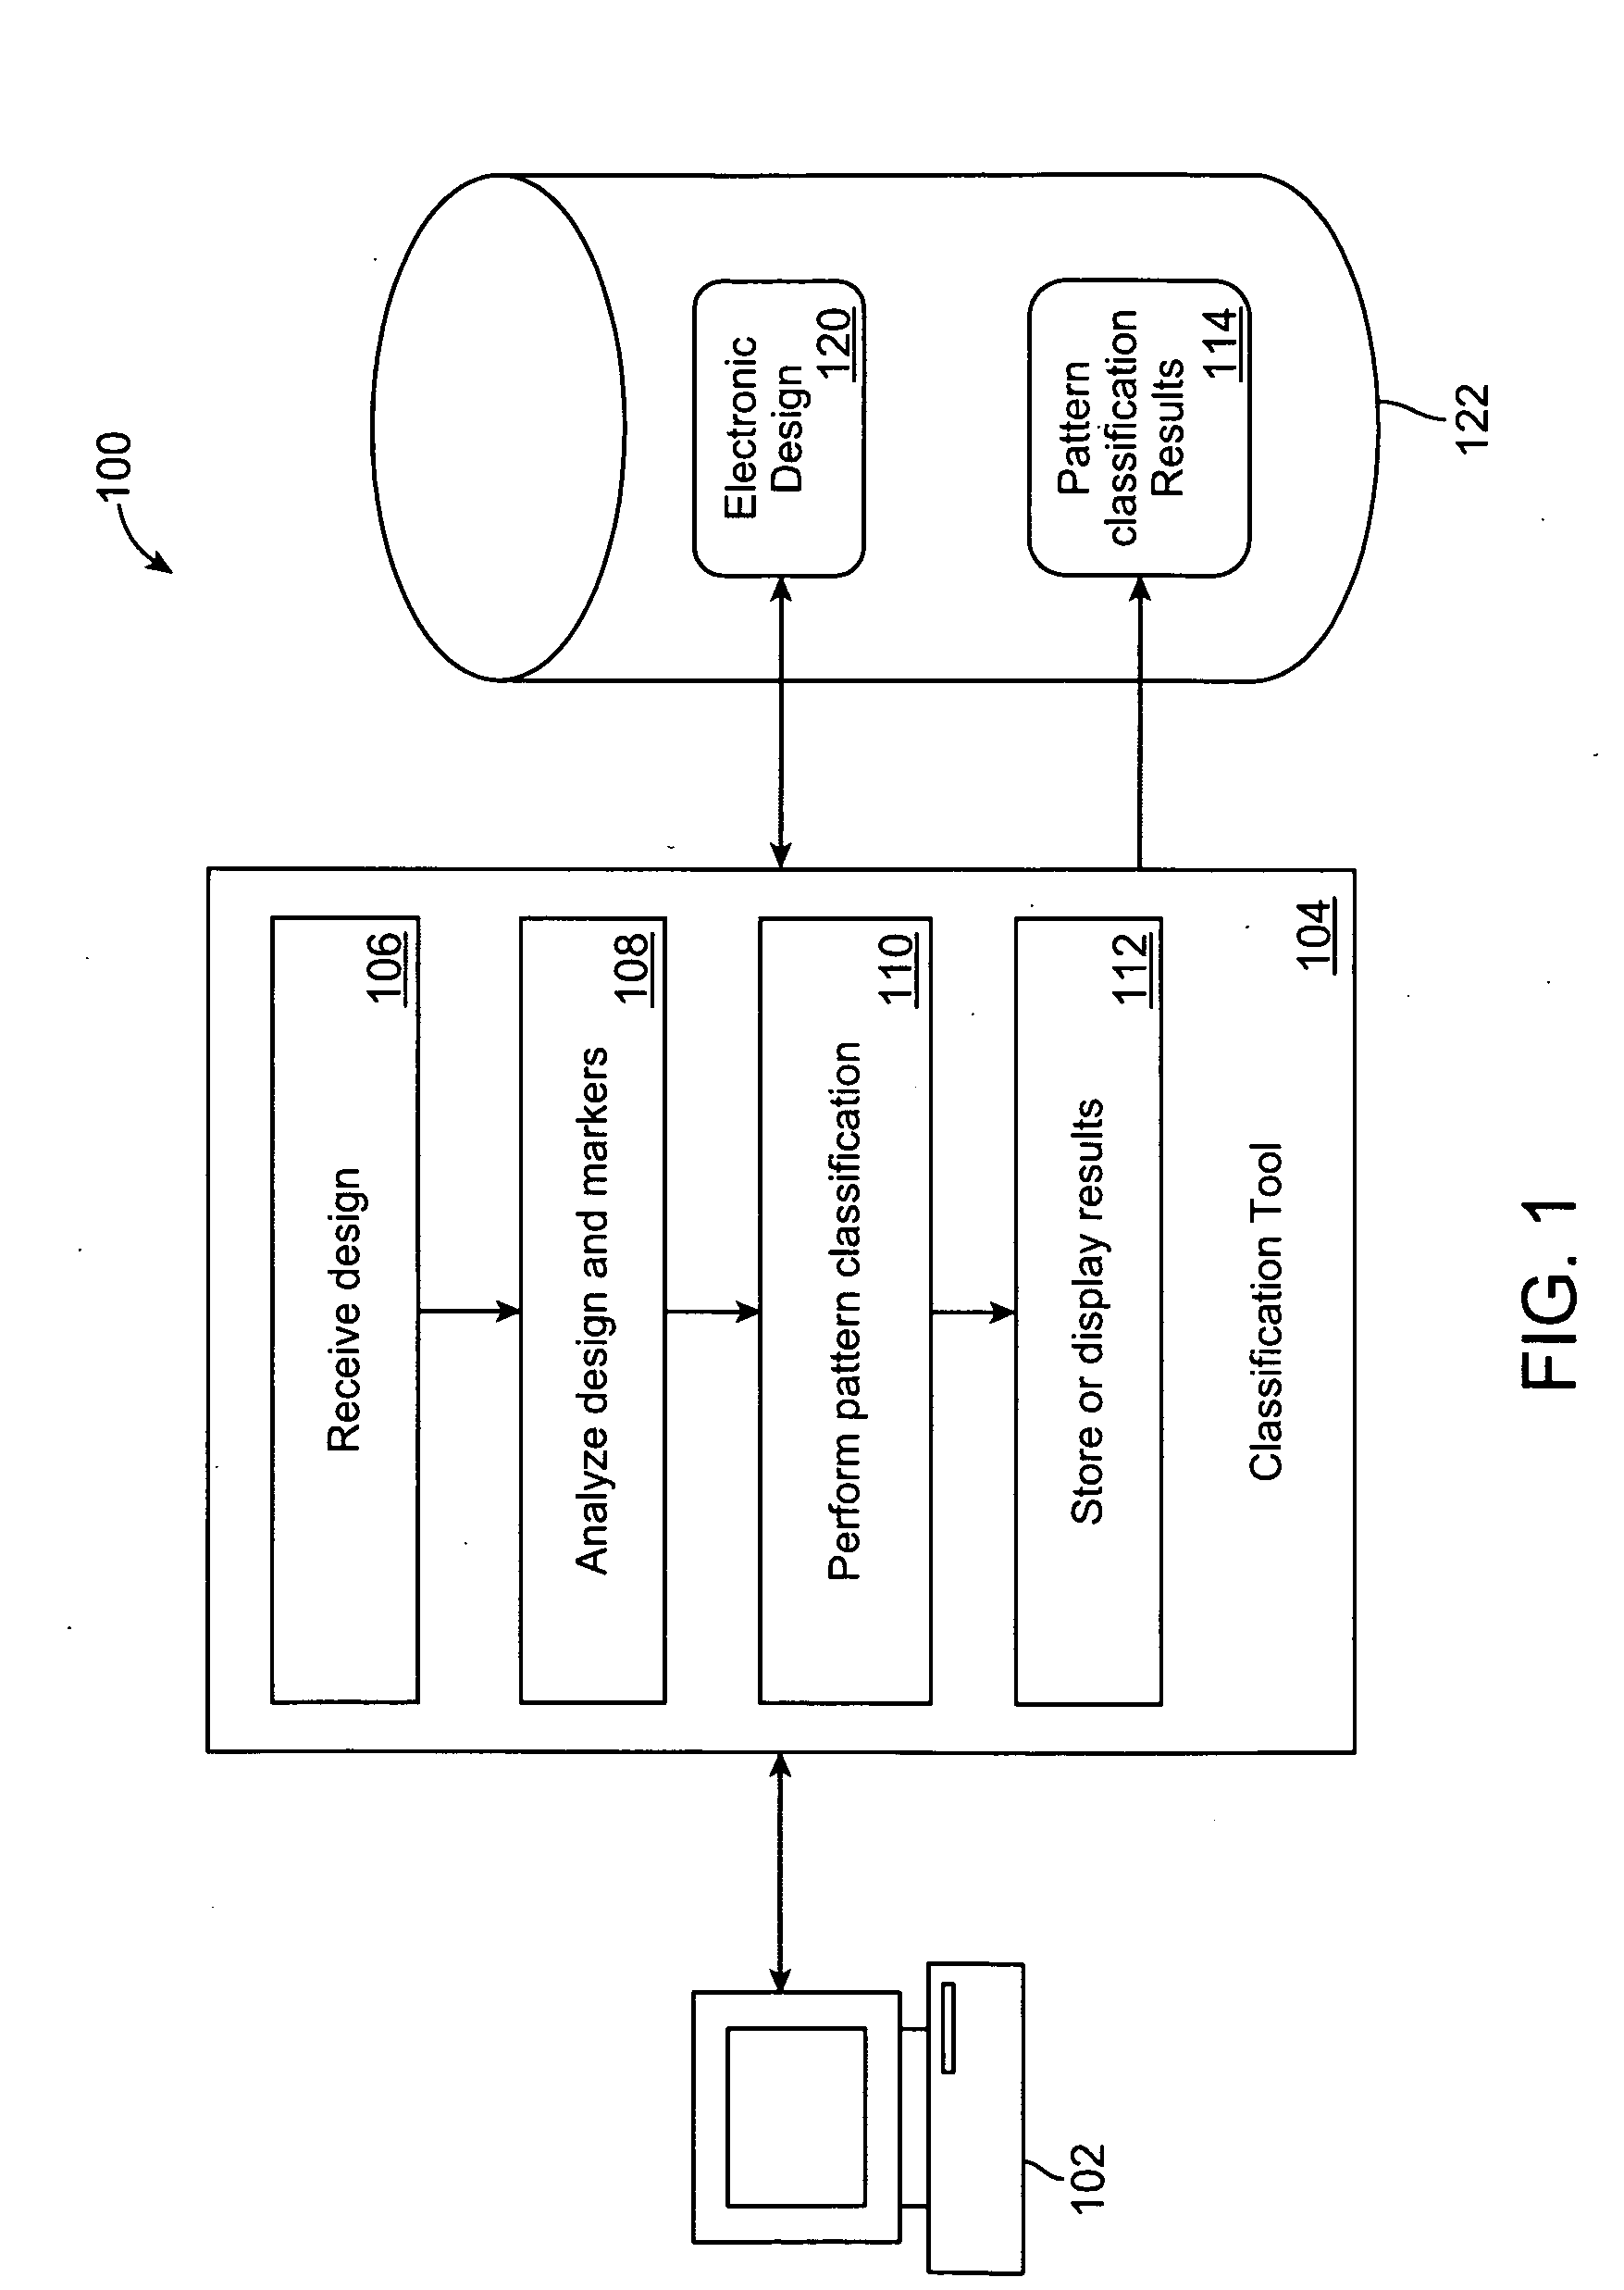 Method and system for performing pattern classification of patterns in integrated circuit designs